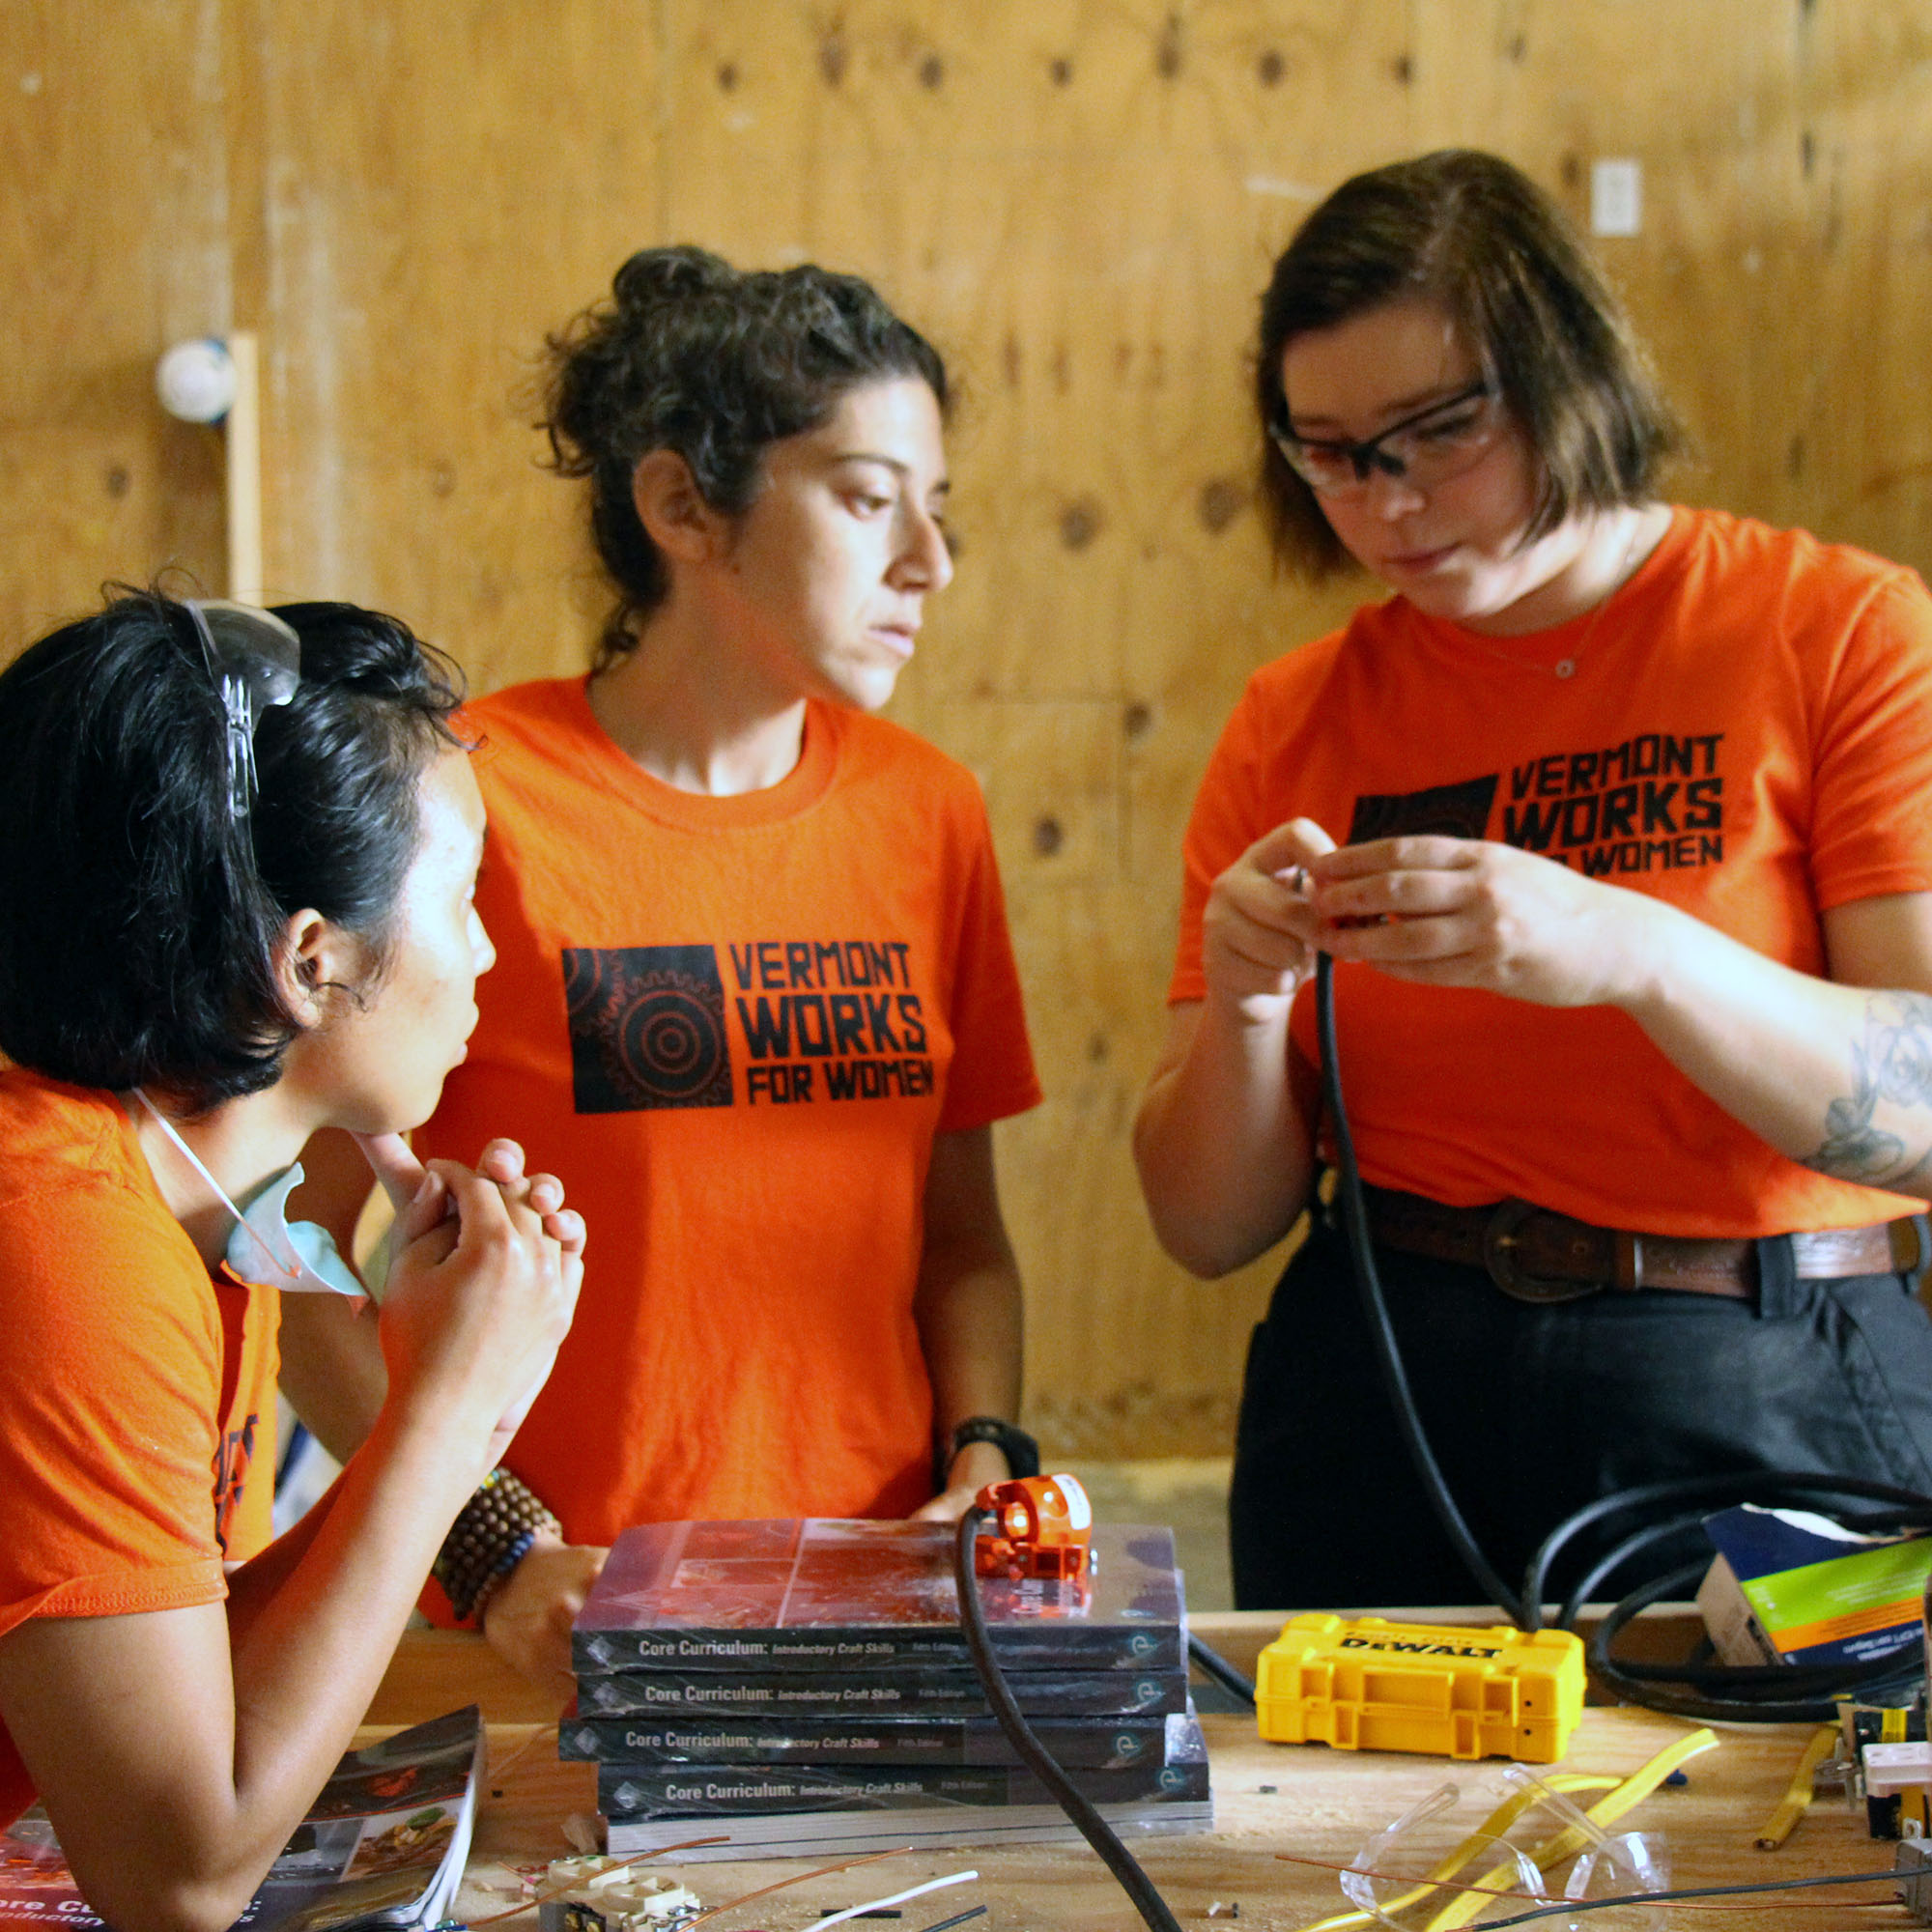 Trailblazers examine wire together in the shop. Trailblazers is founded in Vermont Works for Women's history of being a trades training organization.